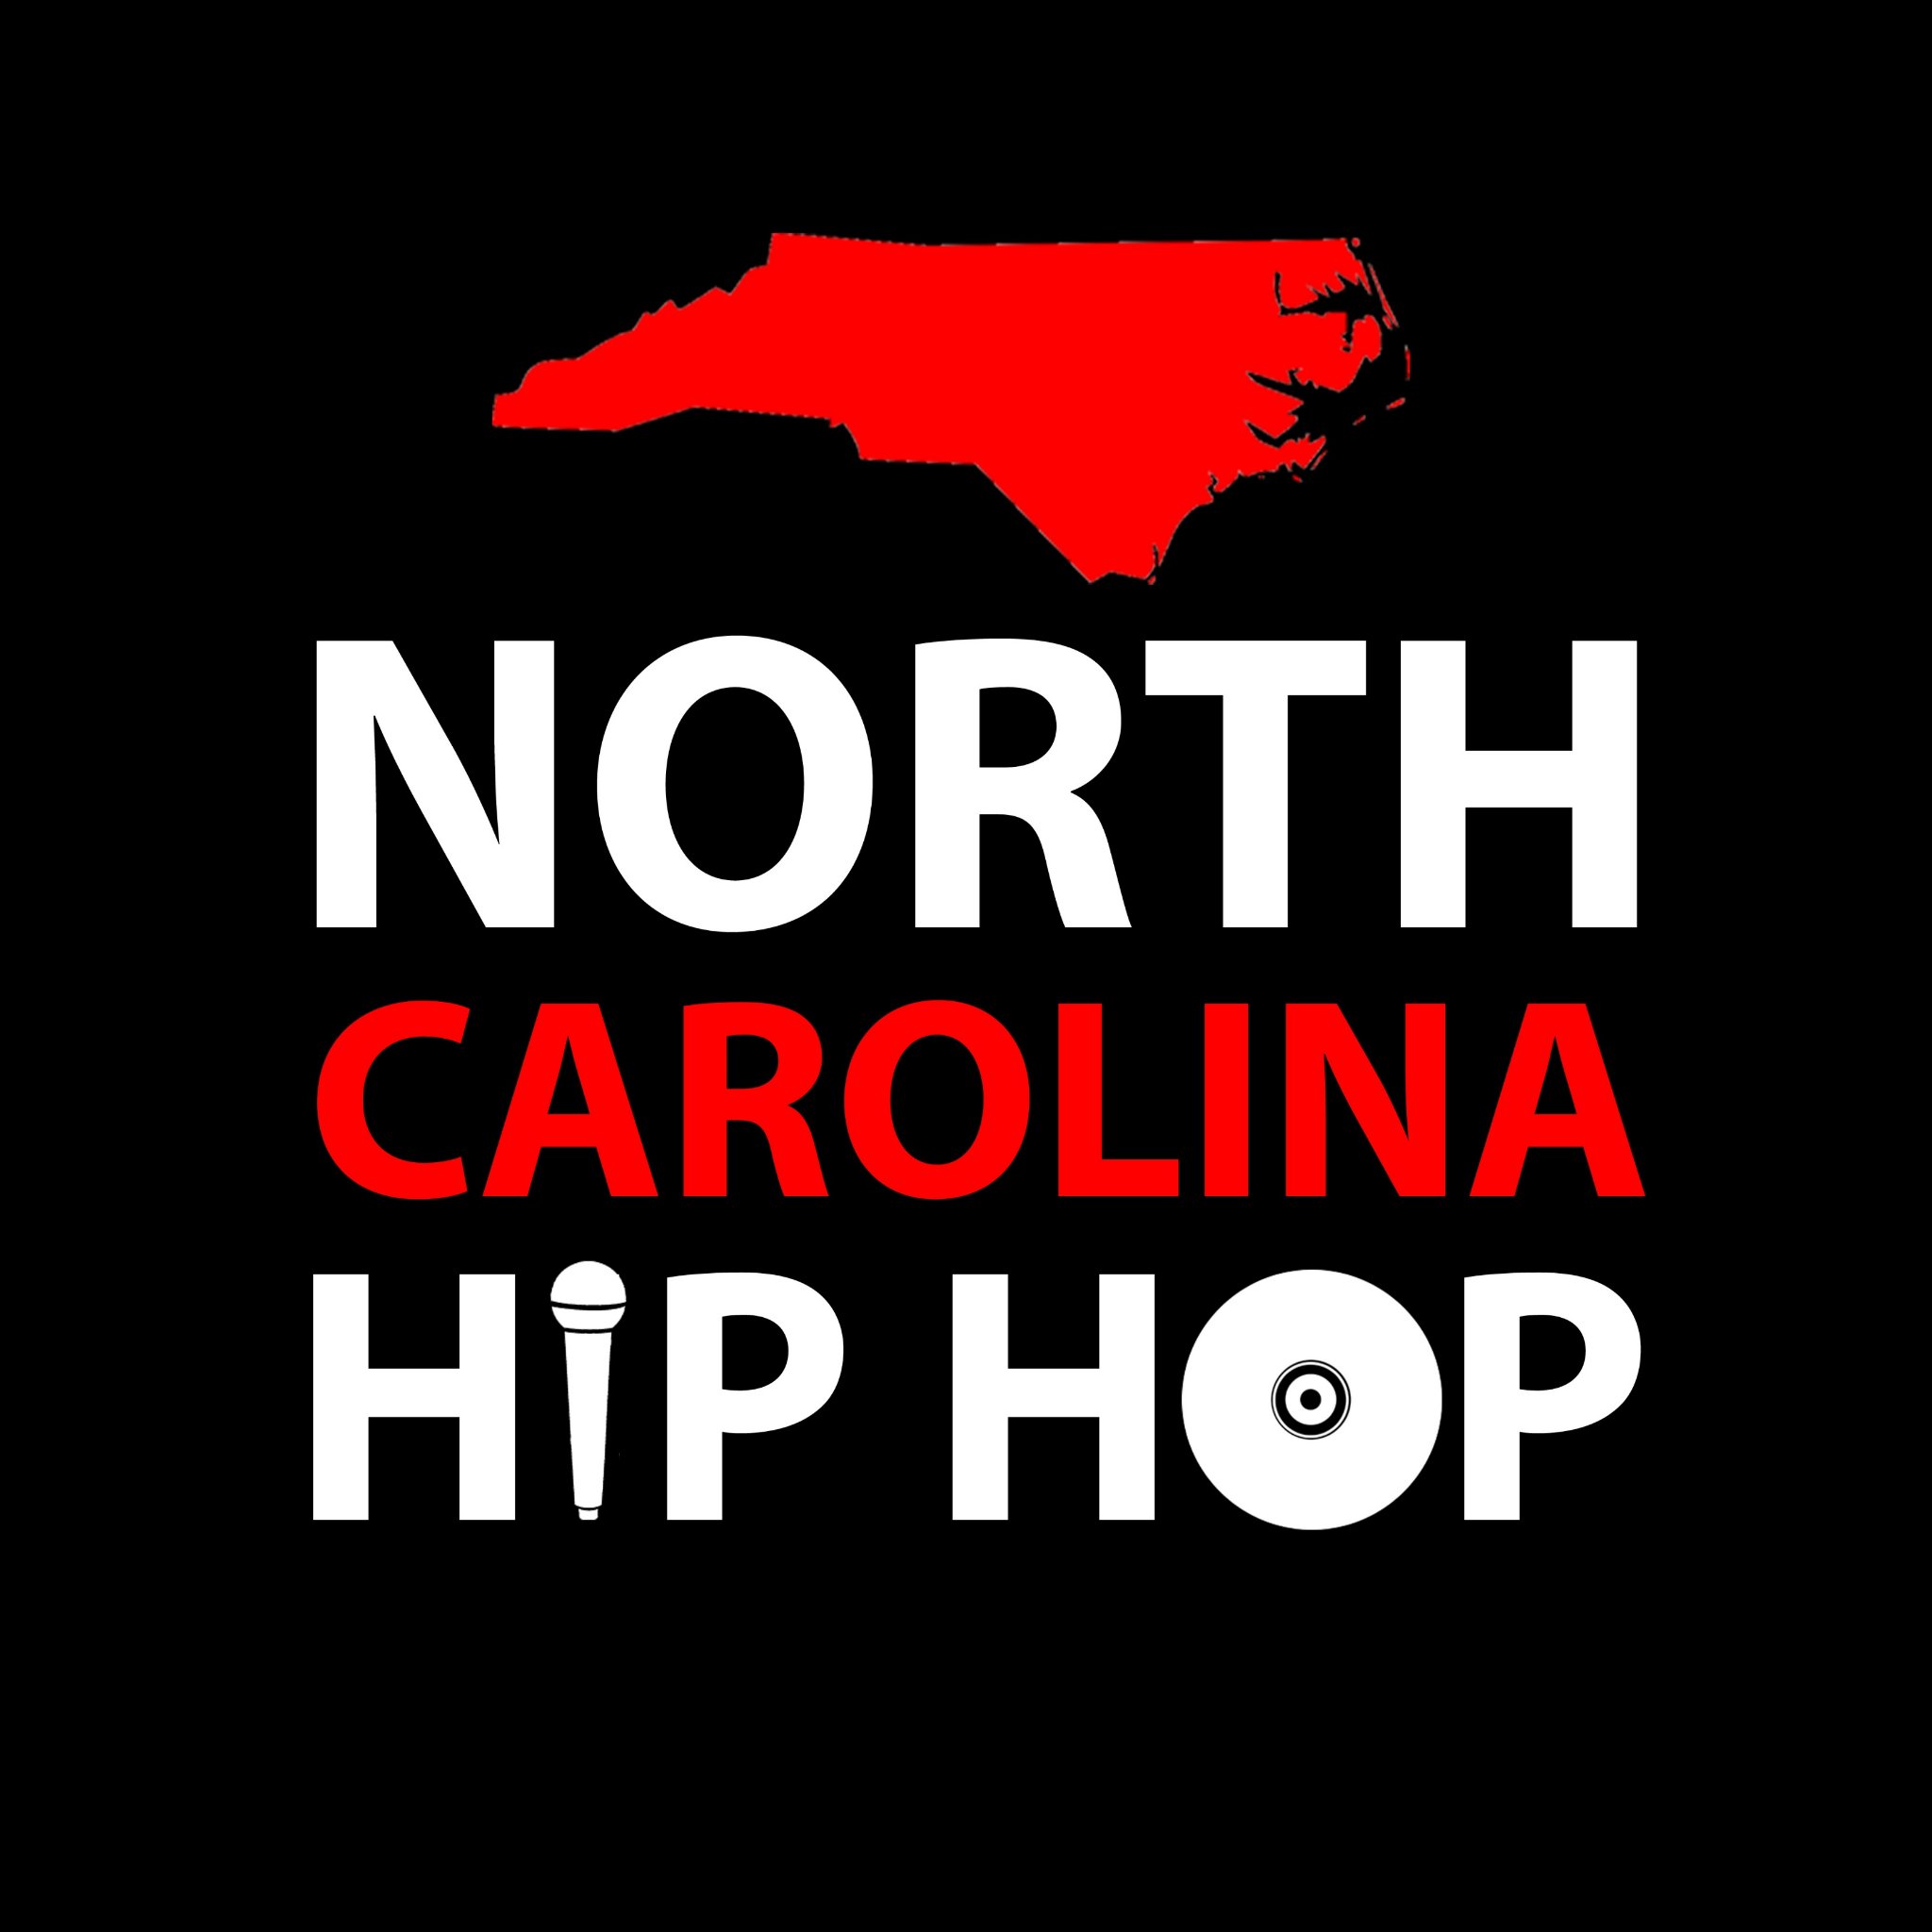 The full authority on all things hip hop in NC
Displaying only the hottest 